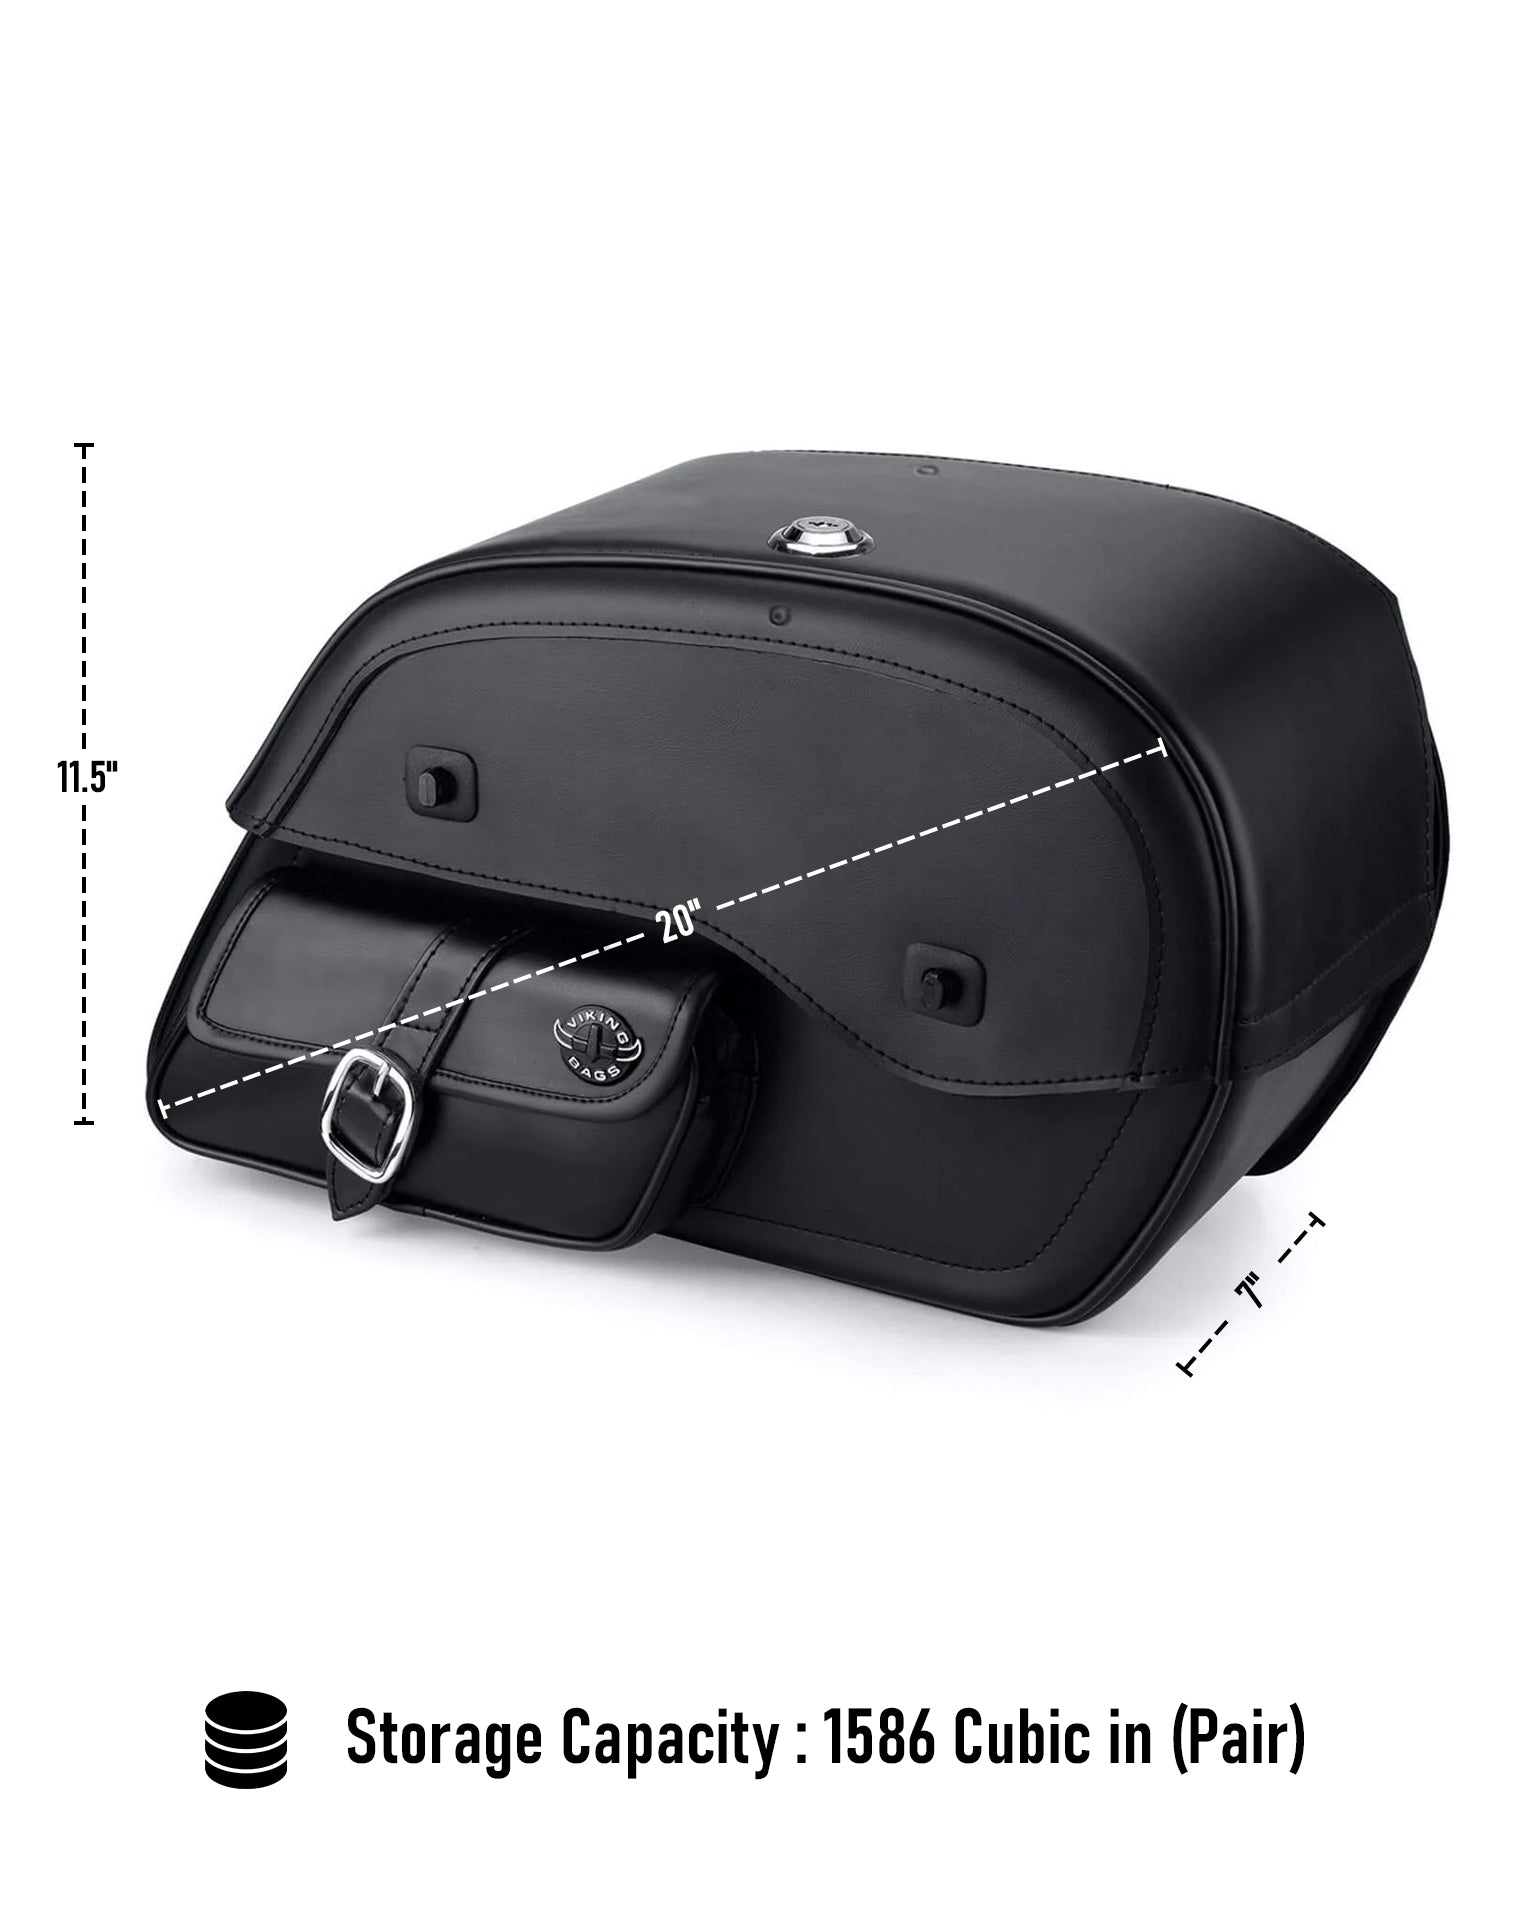 Viking Essential Side Pocket Large Shock Cutout Leather Motorcycle Saddlebags For Harley Sportster 1200 Nightster Xl1200N Can Store Your Ridings Gears